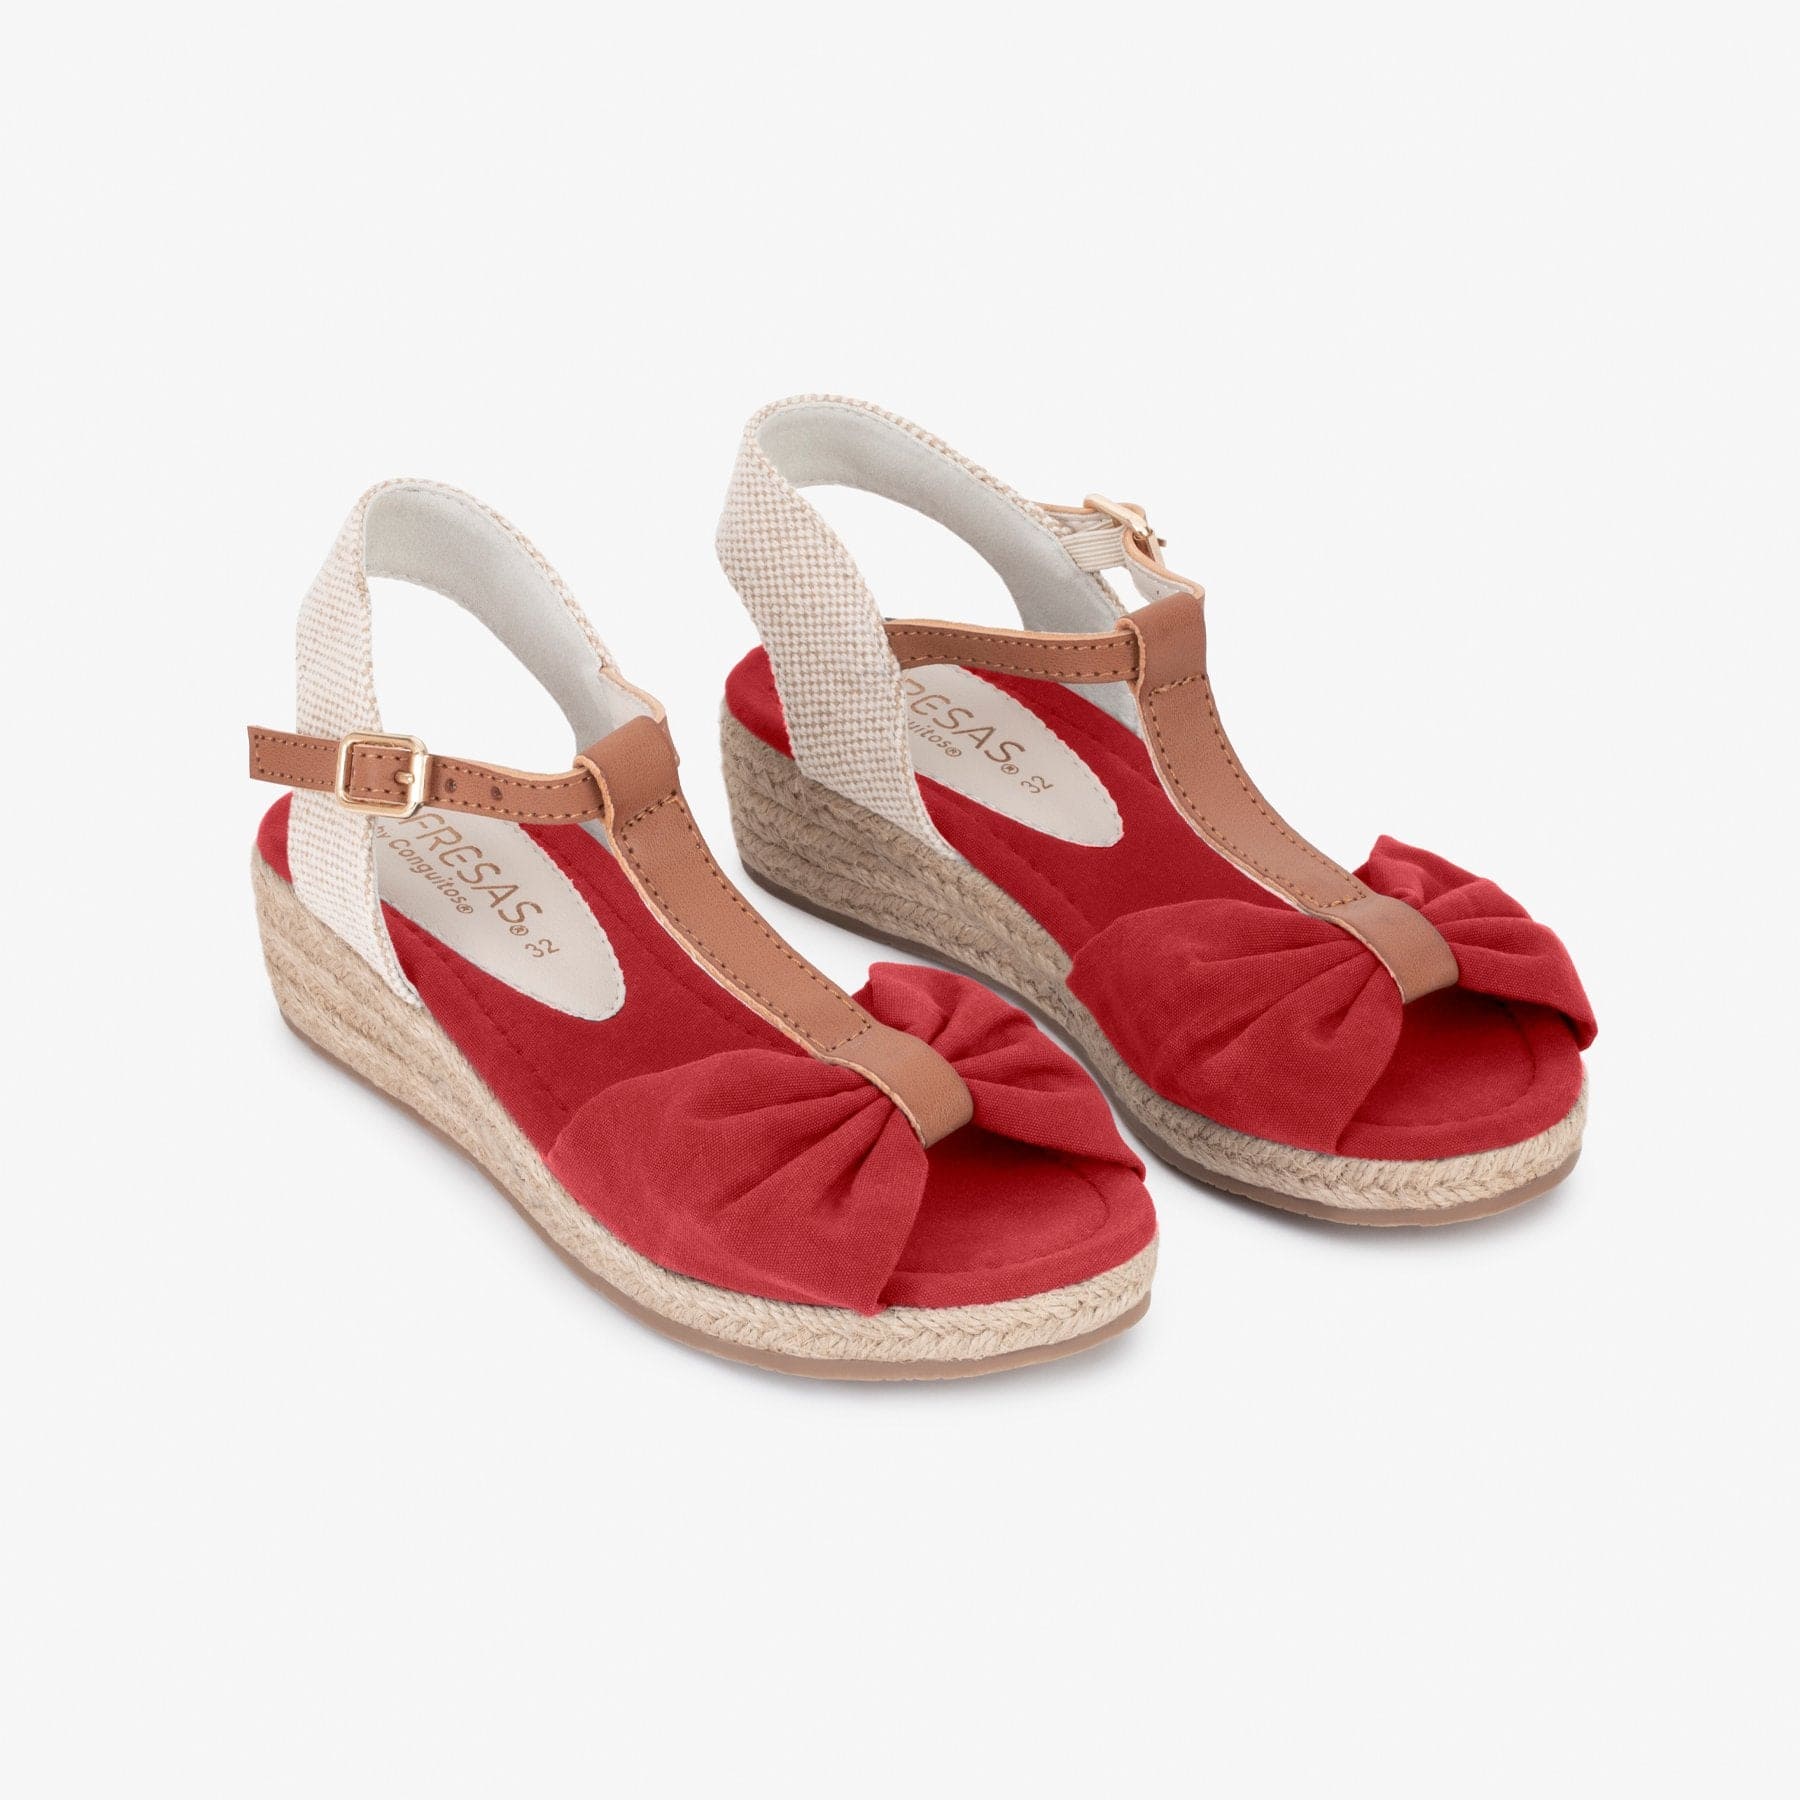 FRESAS CON NATA Shoes Girl's Red Canvas Wedge Sandals